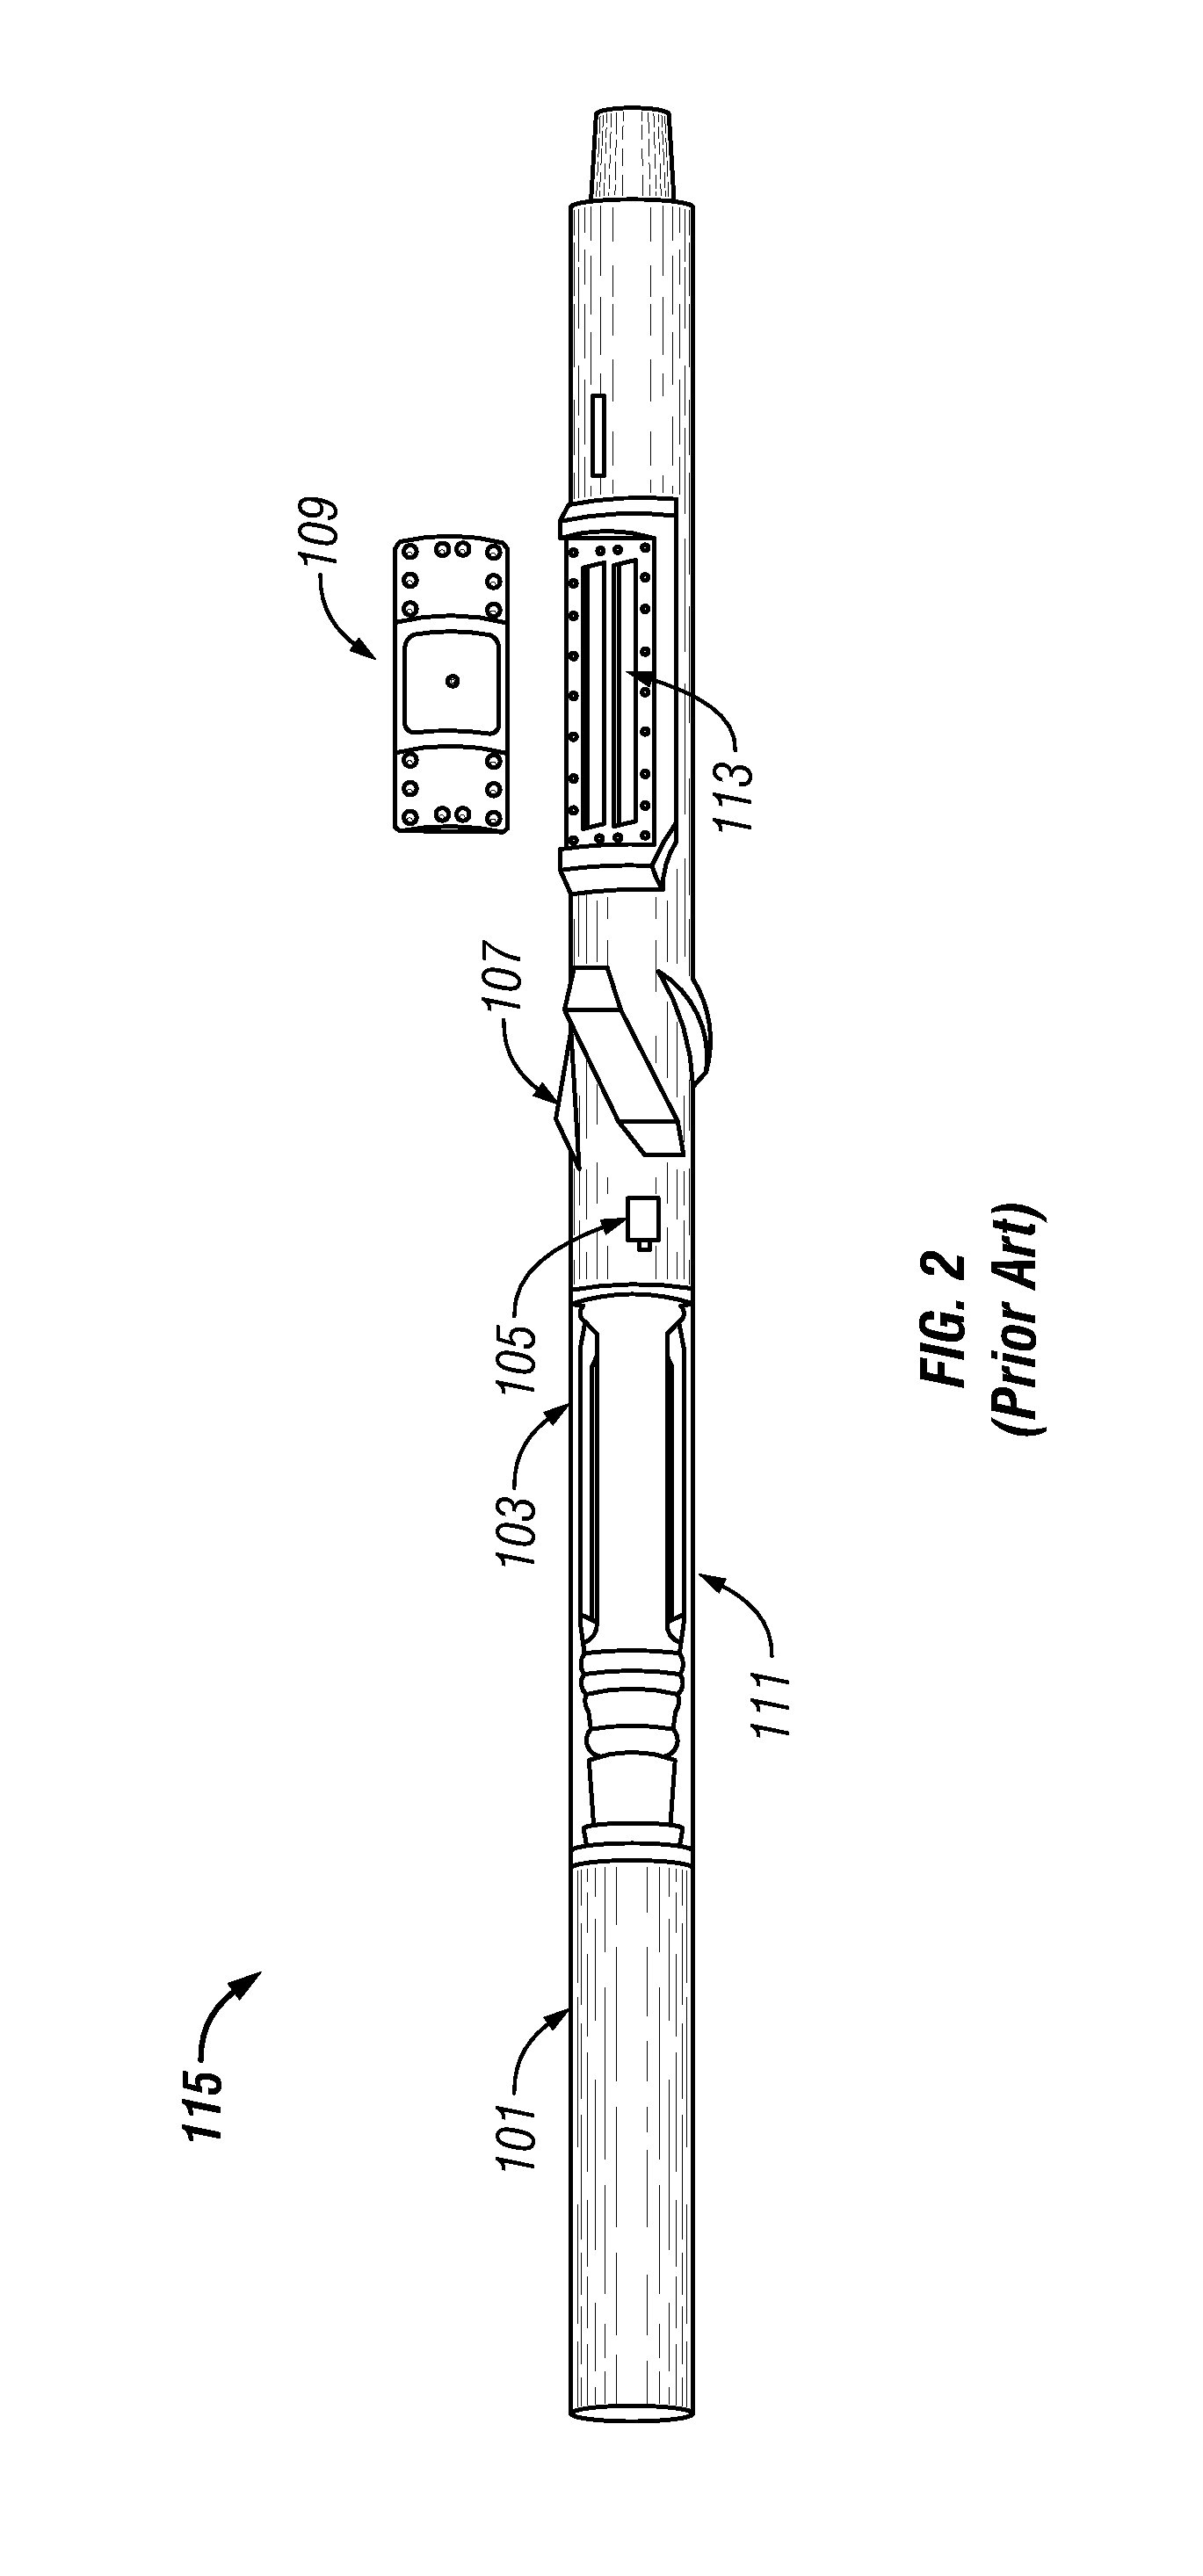 Method and apparatus for improved current focusing in galvanic resistivity measurement tools for wireline and measurement-while-drilling applications